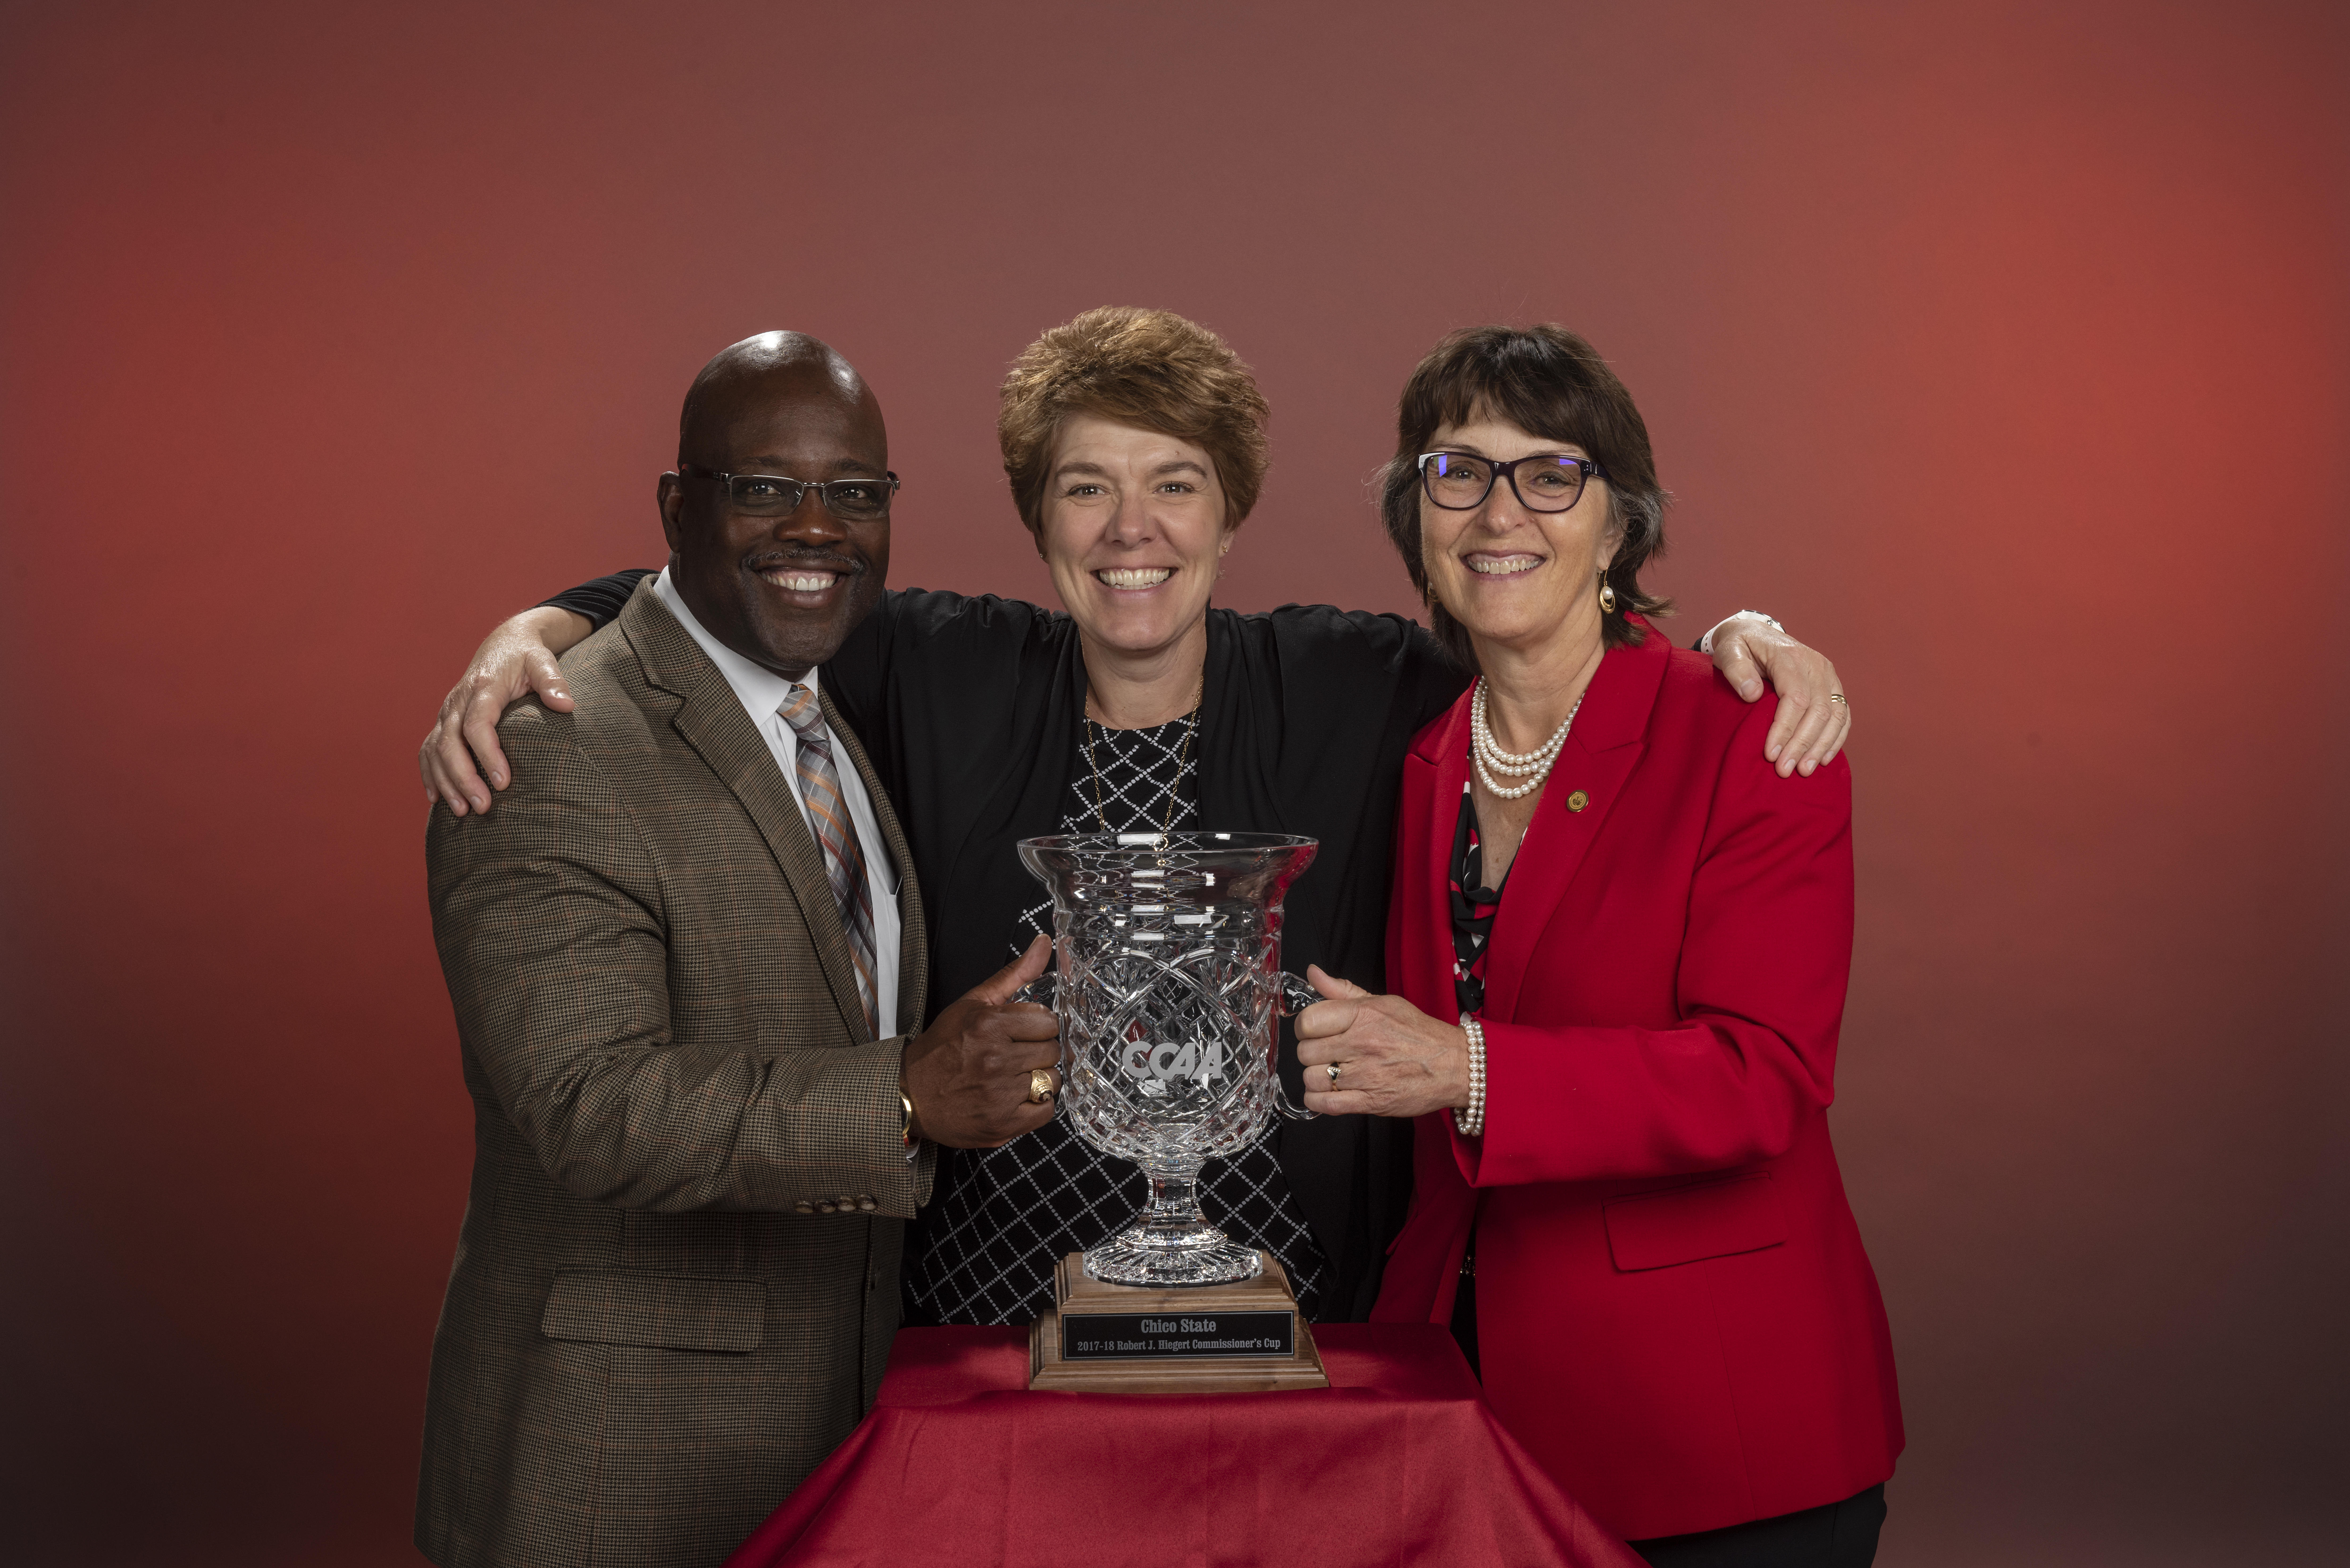 Anita stands behind the cut-glass trophy with one arm each around Milton Lang and Gayle Hutchinson.